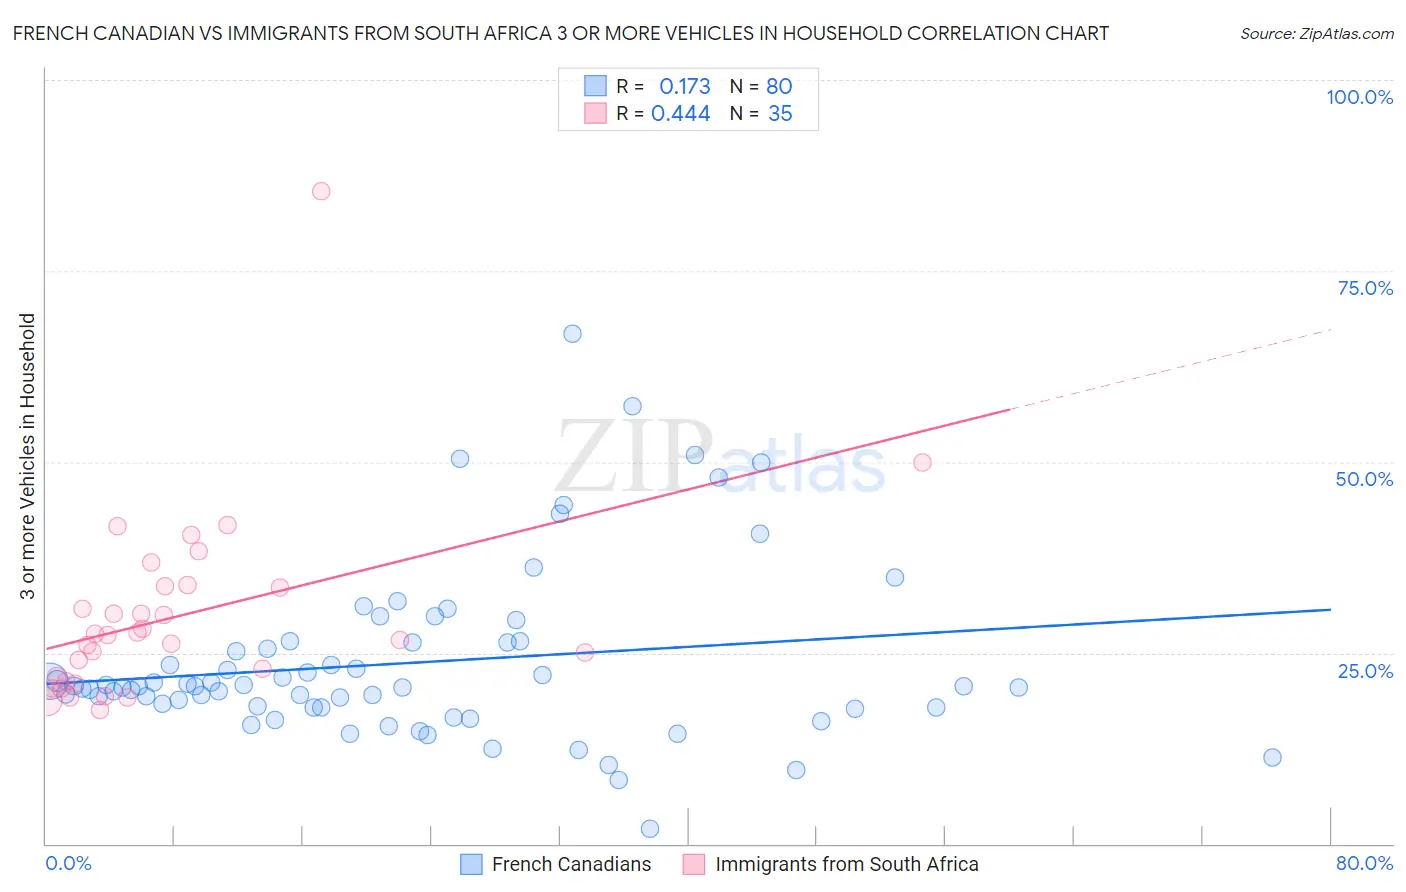 French Canadian vs Immigrants from South Africa 3 or more Vehicles in Household